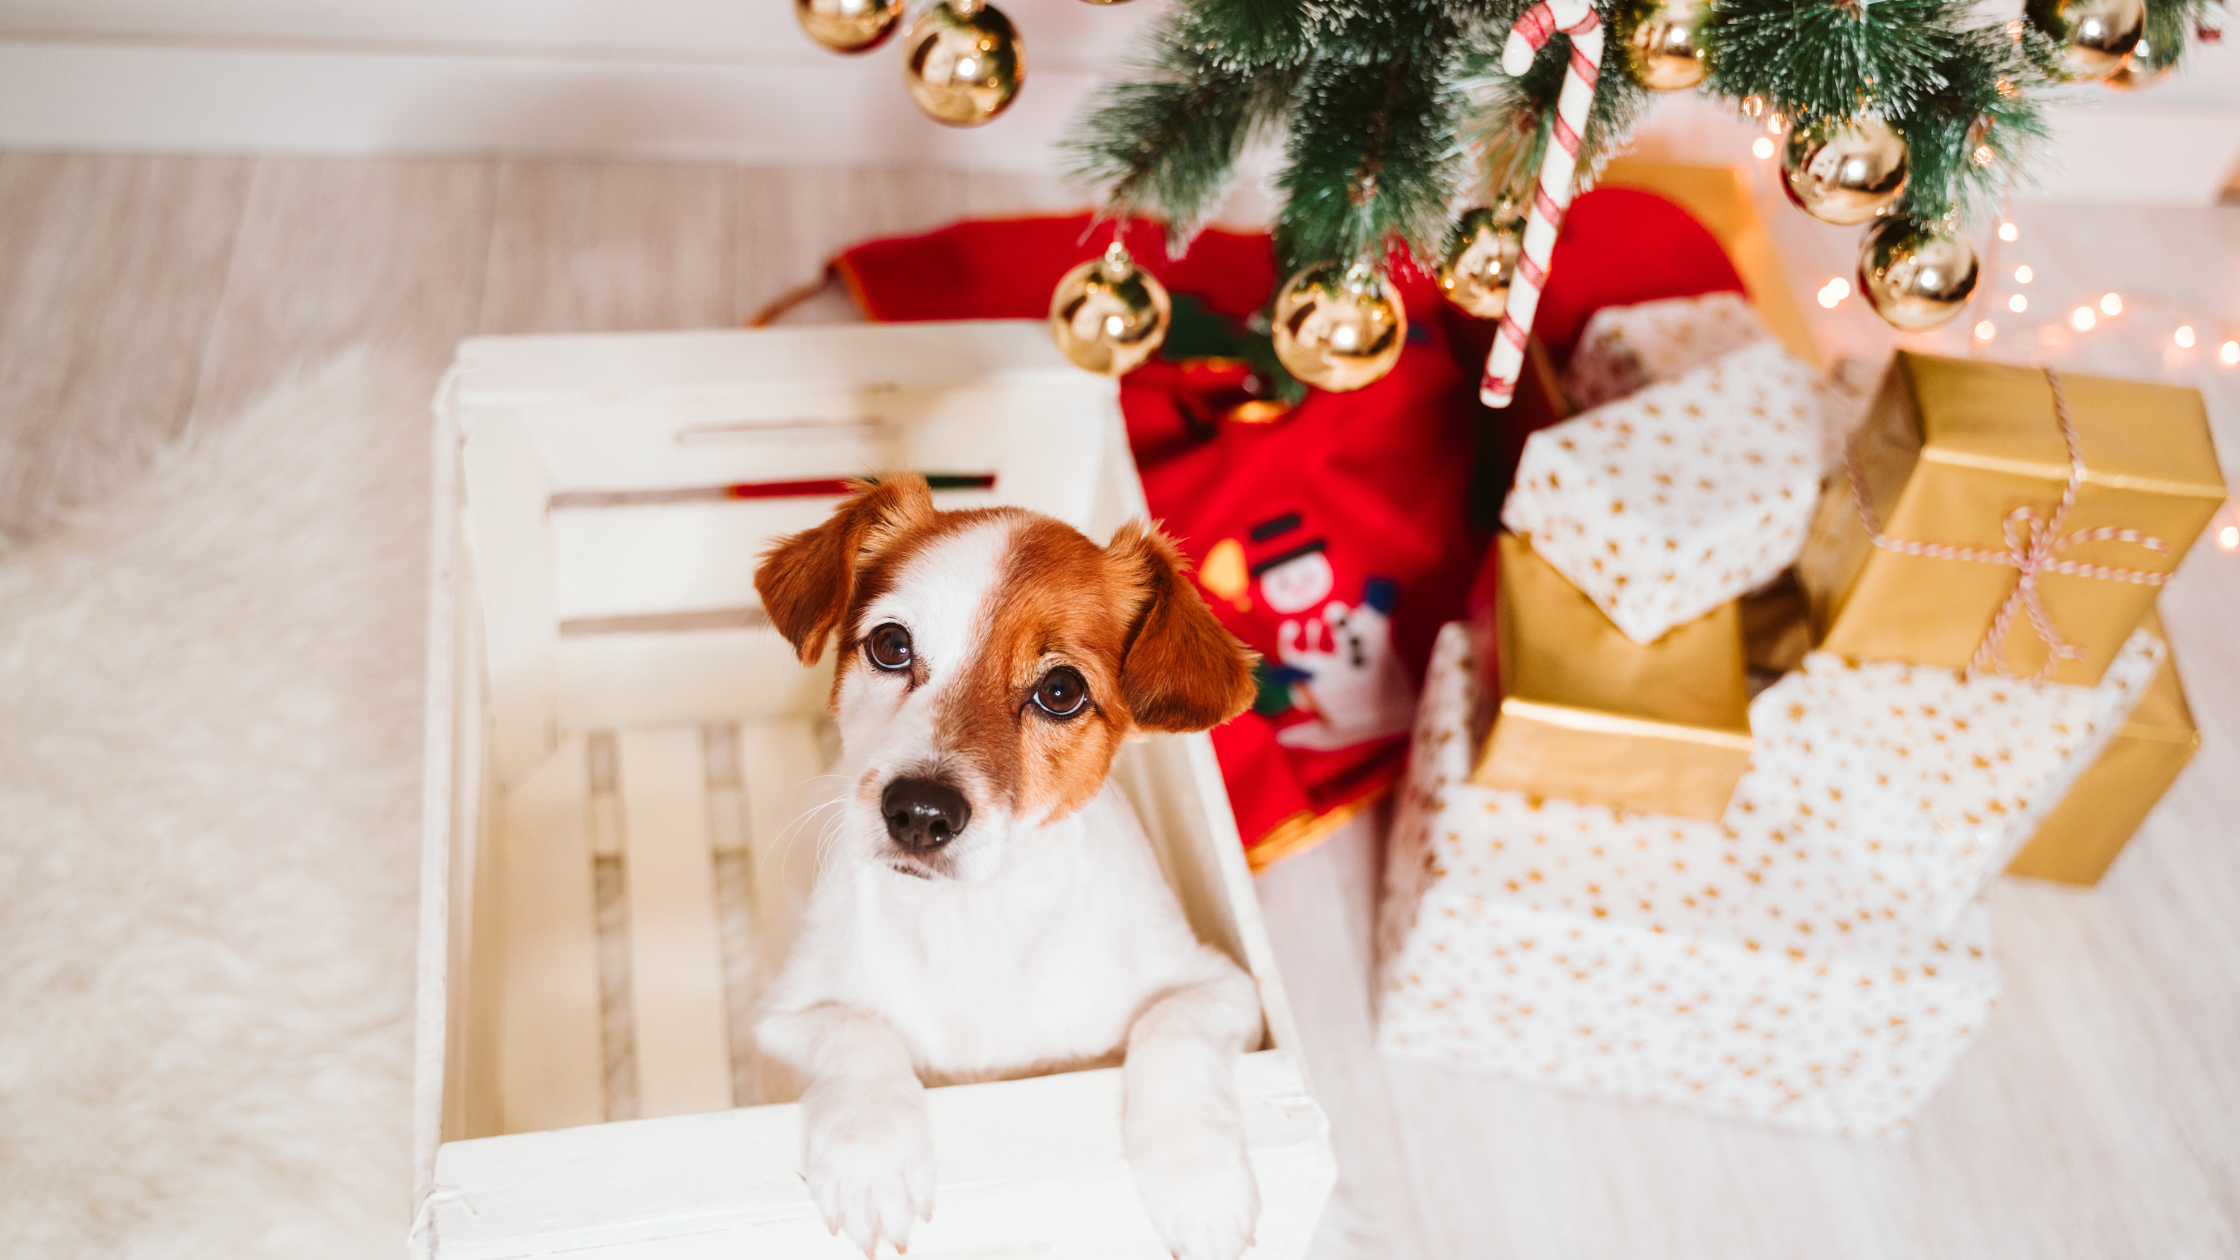 Santa Paws is Coming: How to Include Your Dog in Holiday Celebrations